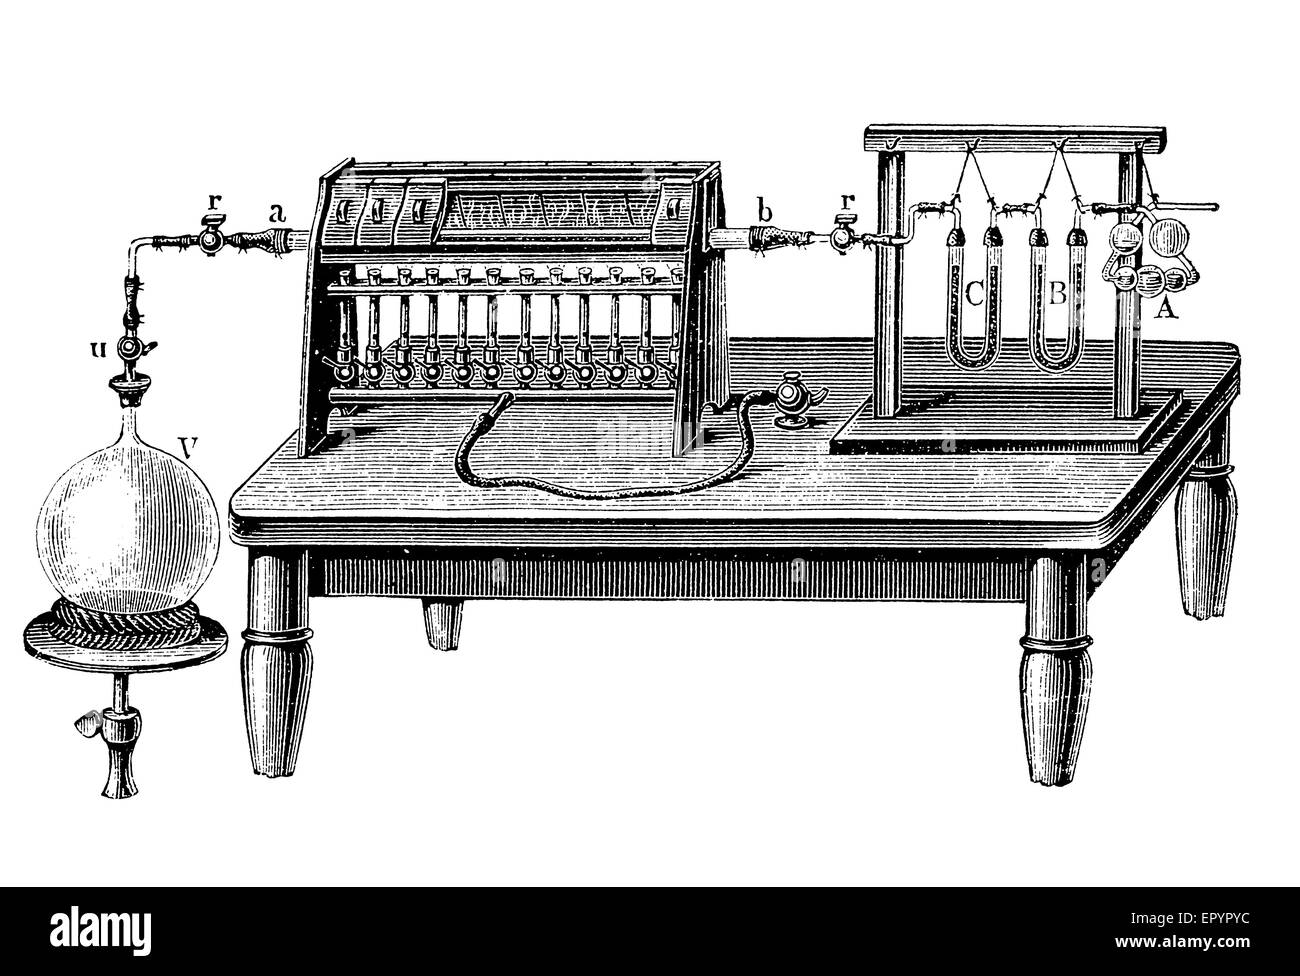 Vintage chemistry engraving, the first decomposition of water into hydrogen and oxygen, by electrolysis, was done in 1800 by English chemist William Nicholson. In 1805, Joseph Louis Gay-Lussac and Alexander von Humboldt showed that water is composed of two parts hydrogen and one part oxygen. Stock Photo